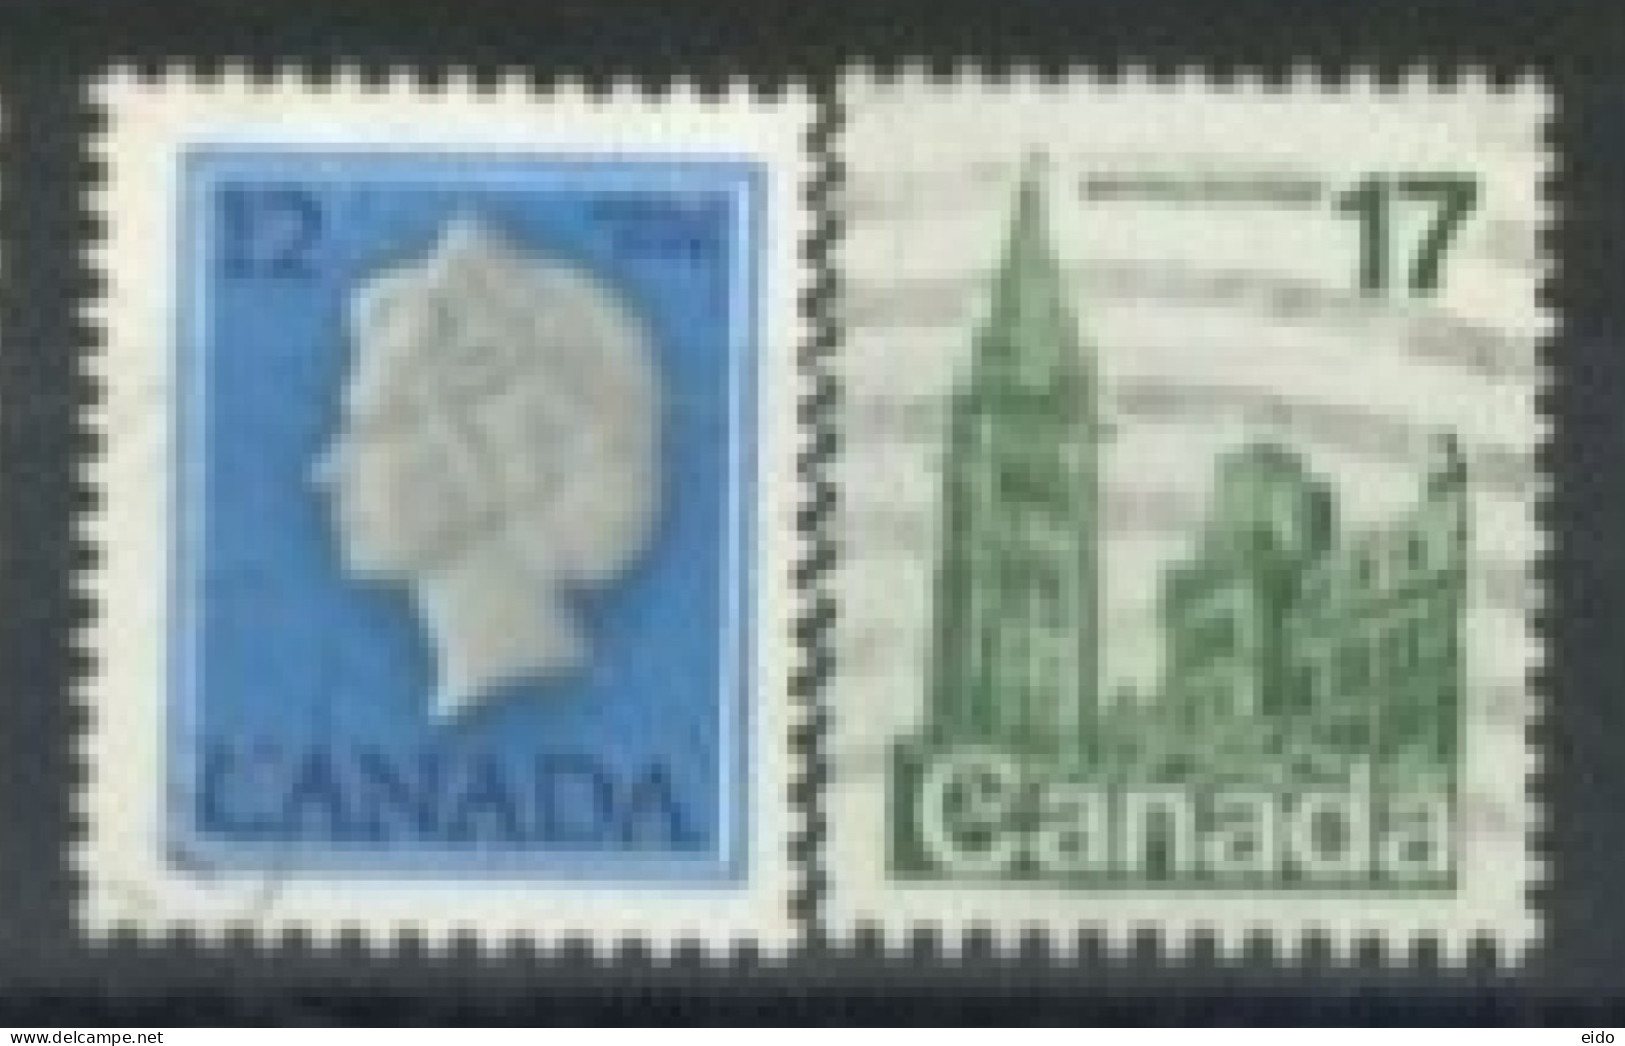 CANADA - 1977, QUEEN ELIZABETH II & HOUSE OF PARLIAMENT STAMPS SET OF 2, USED. - Usados